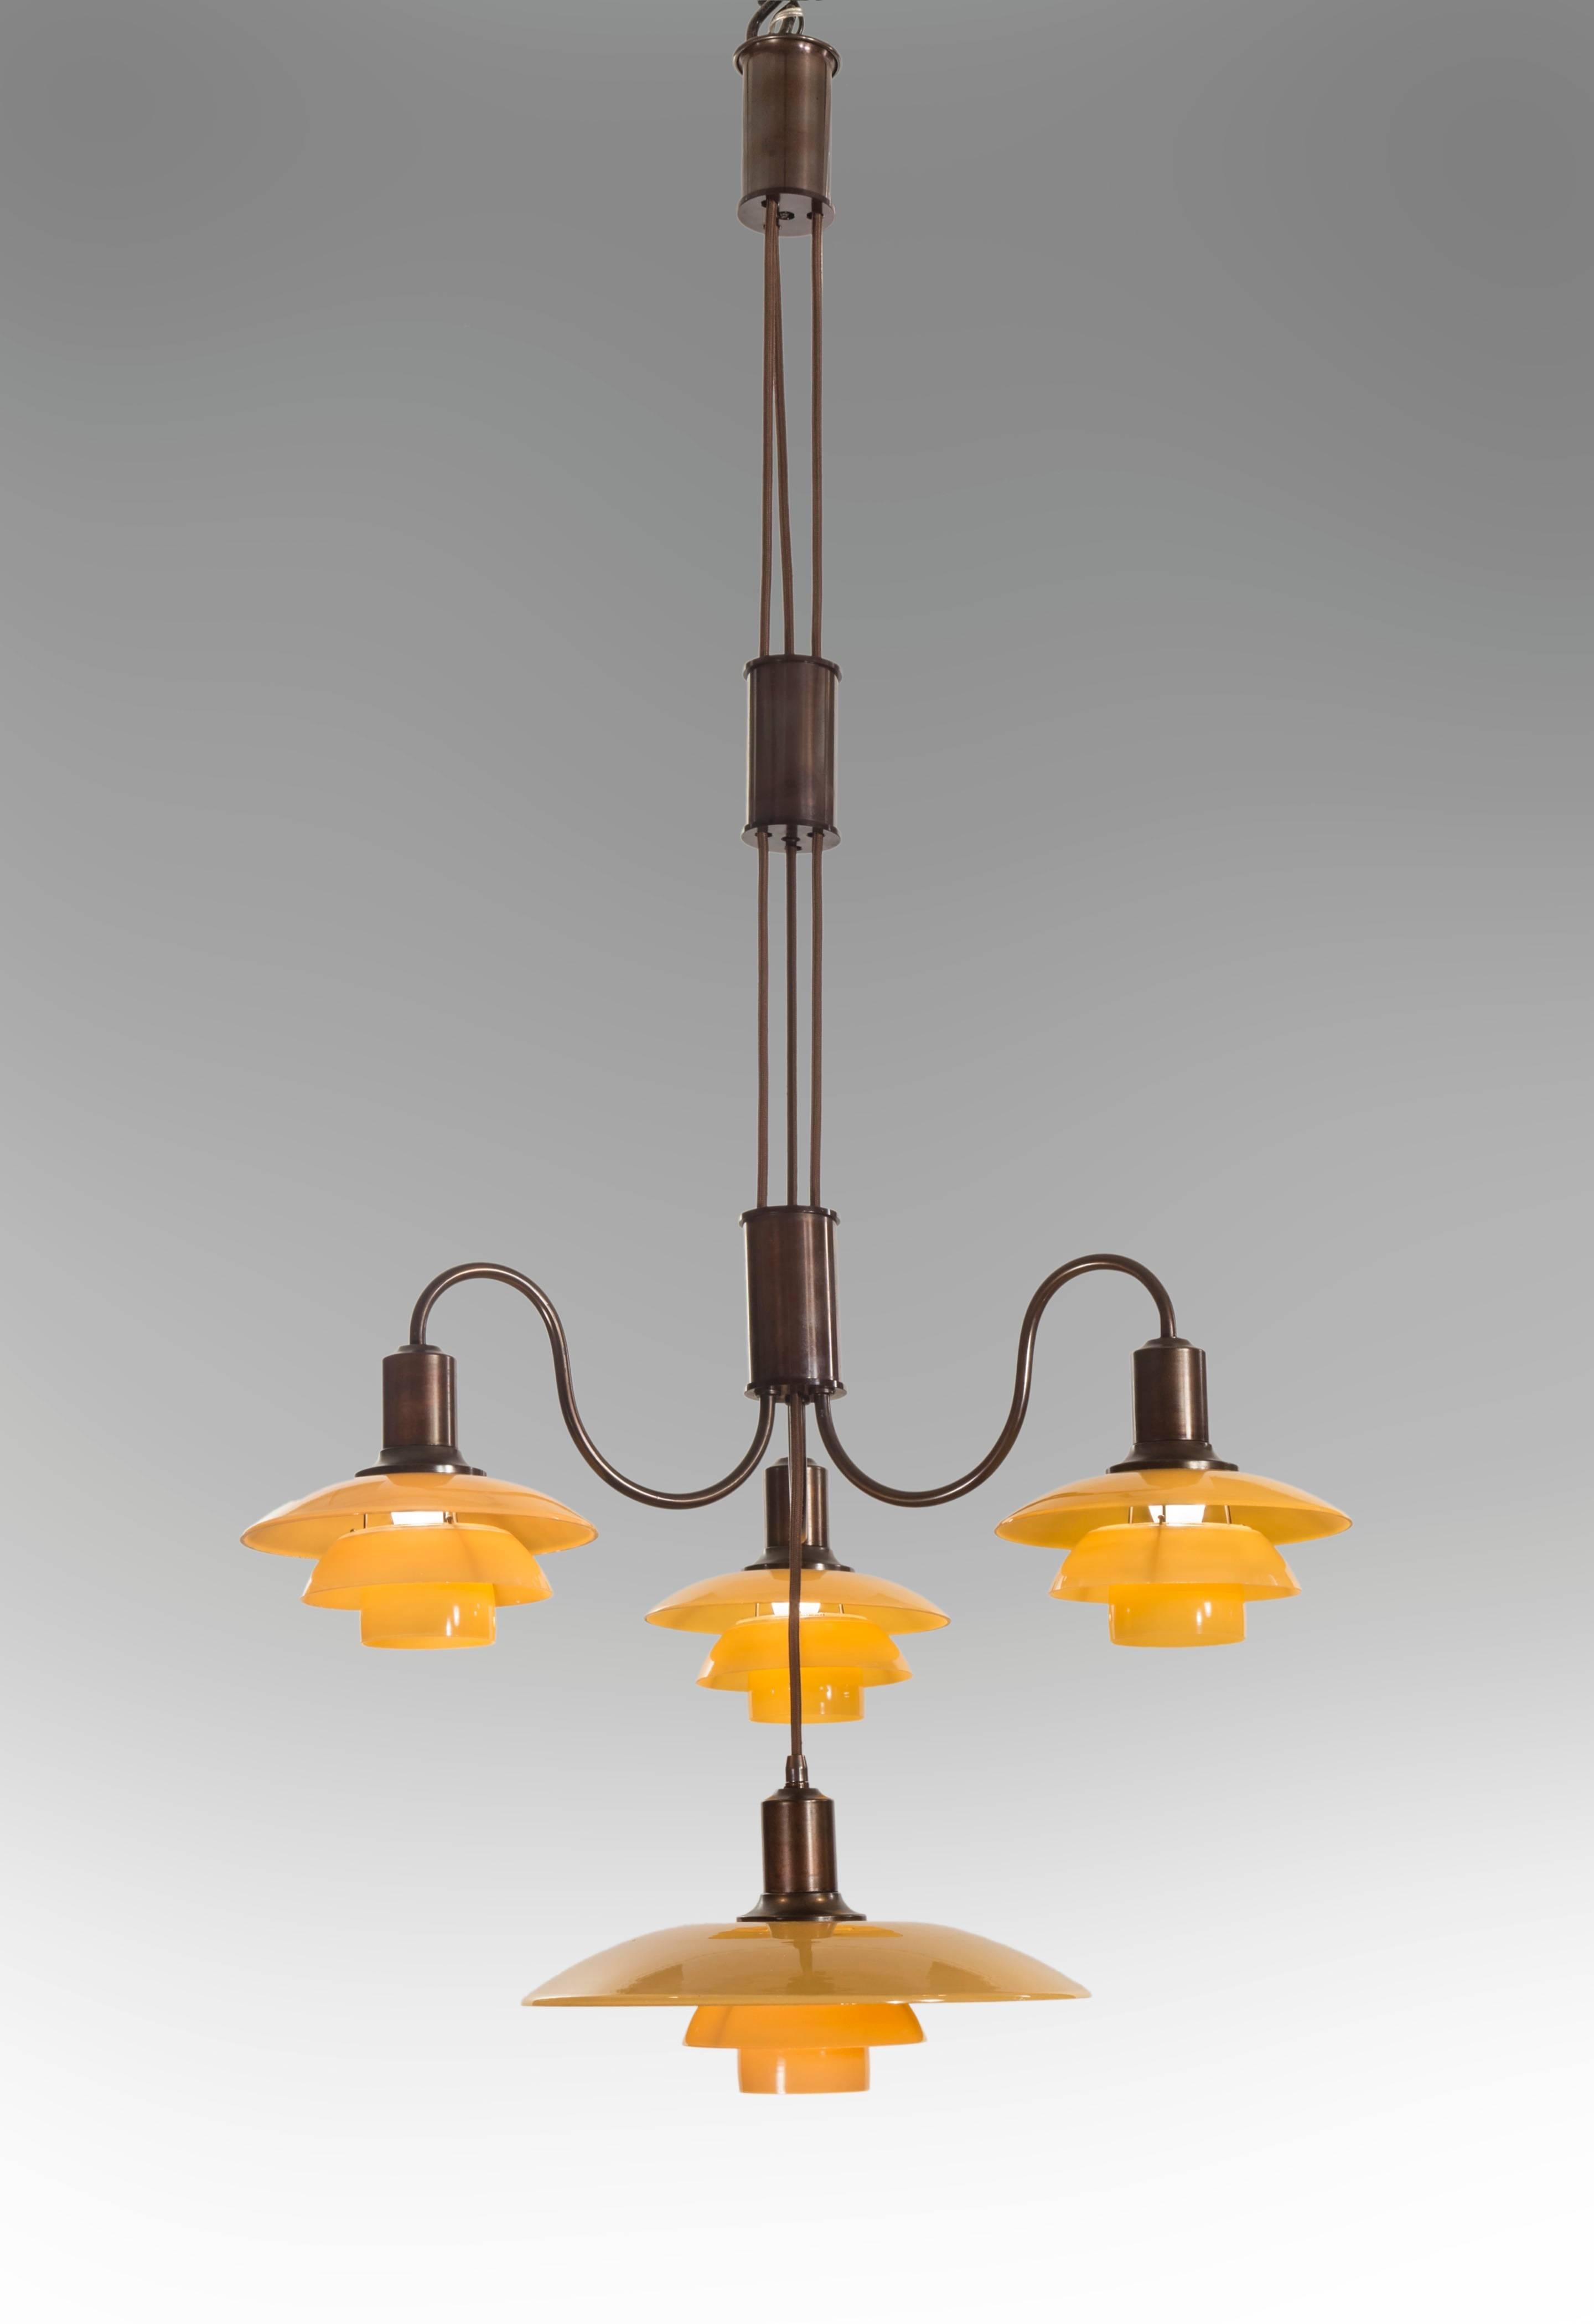 The cylindrical canopy, suspending two height-adjusting cylinders of patinated bronze connected by cords, the bottom cylinder issuing three graceful s-curved arms, each arm with a 2/2 yellow painted glass shade set, centering a 3.5/2 yellow painted